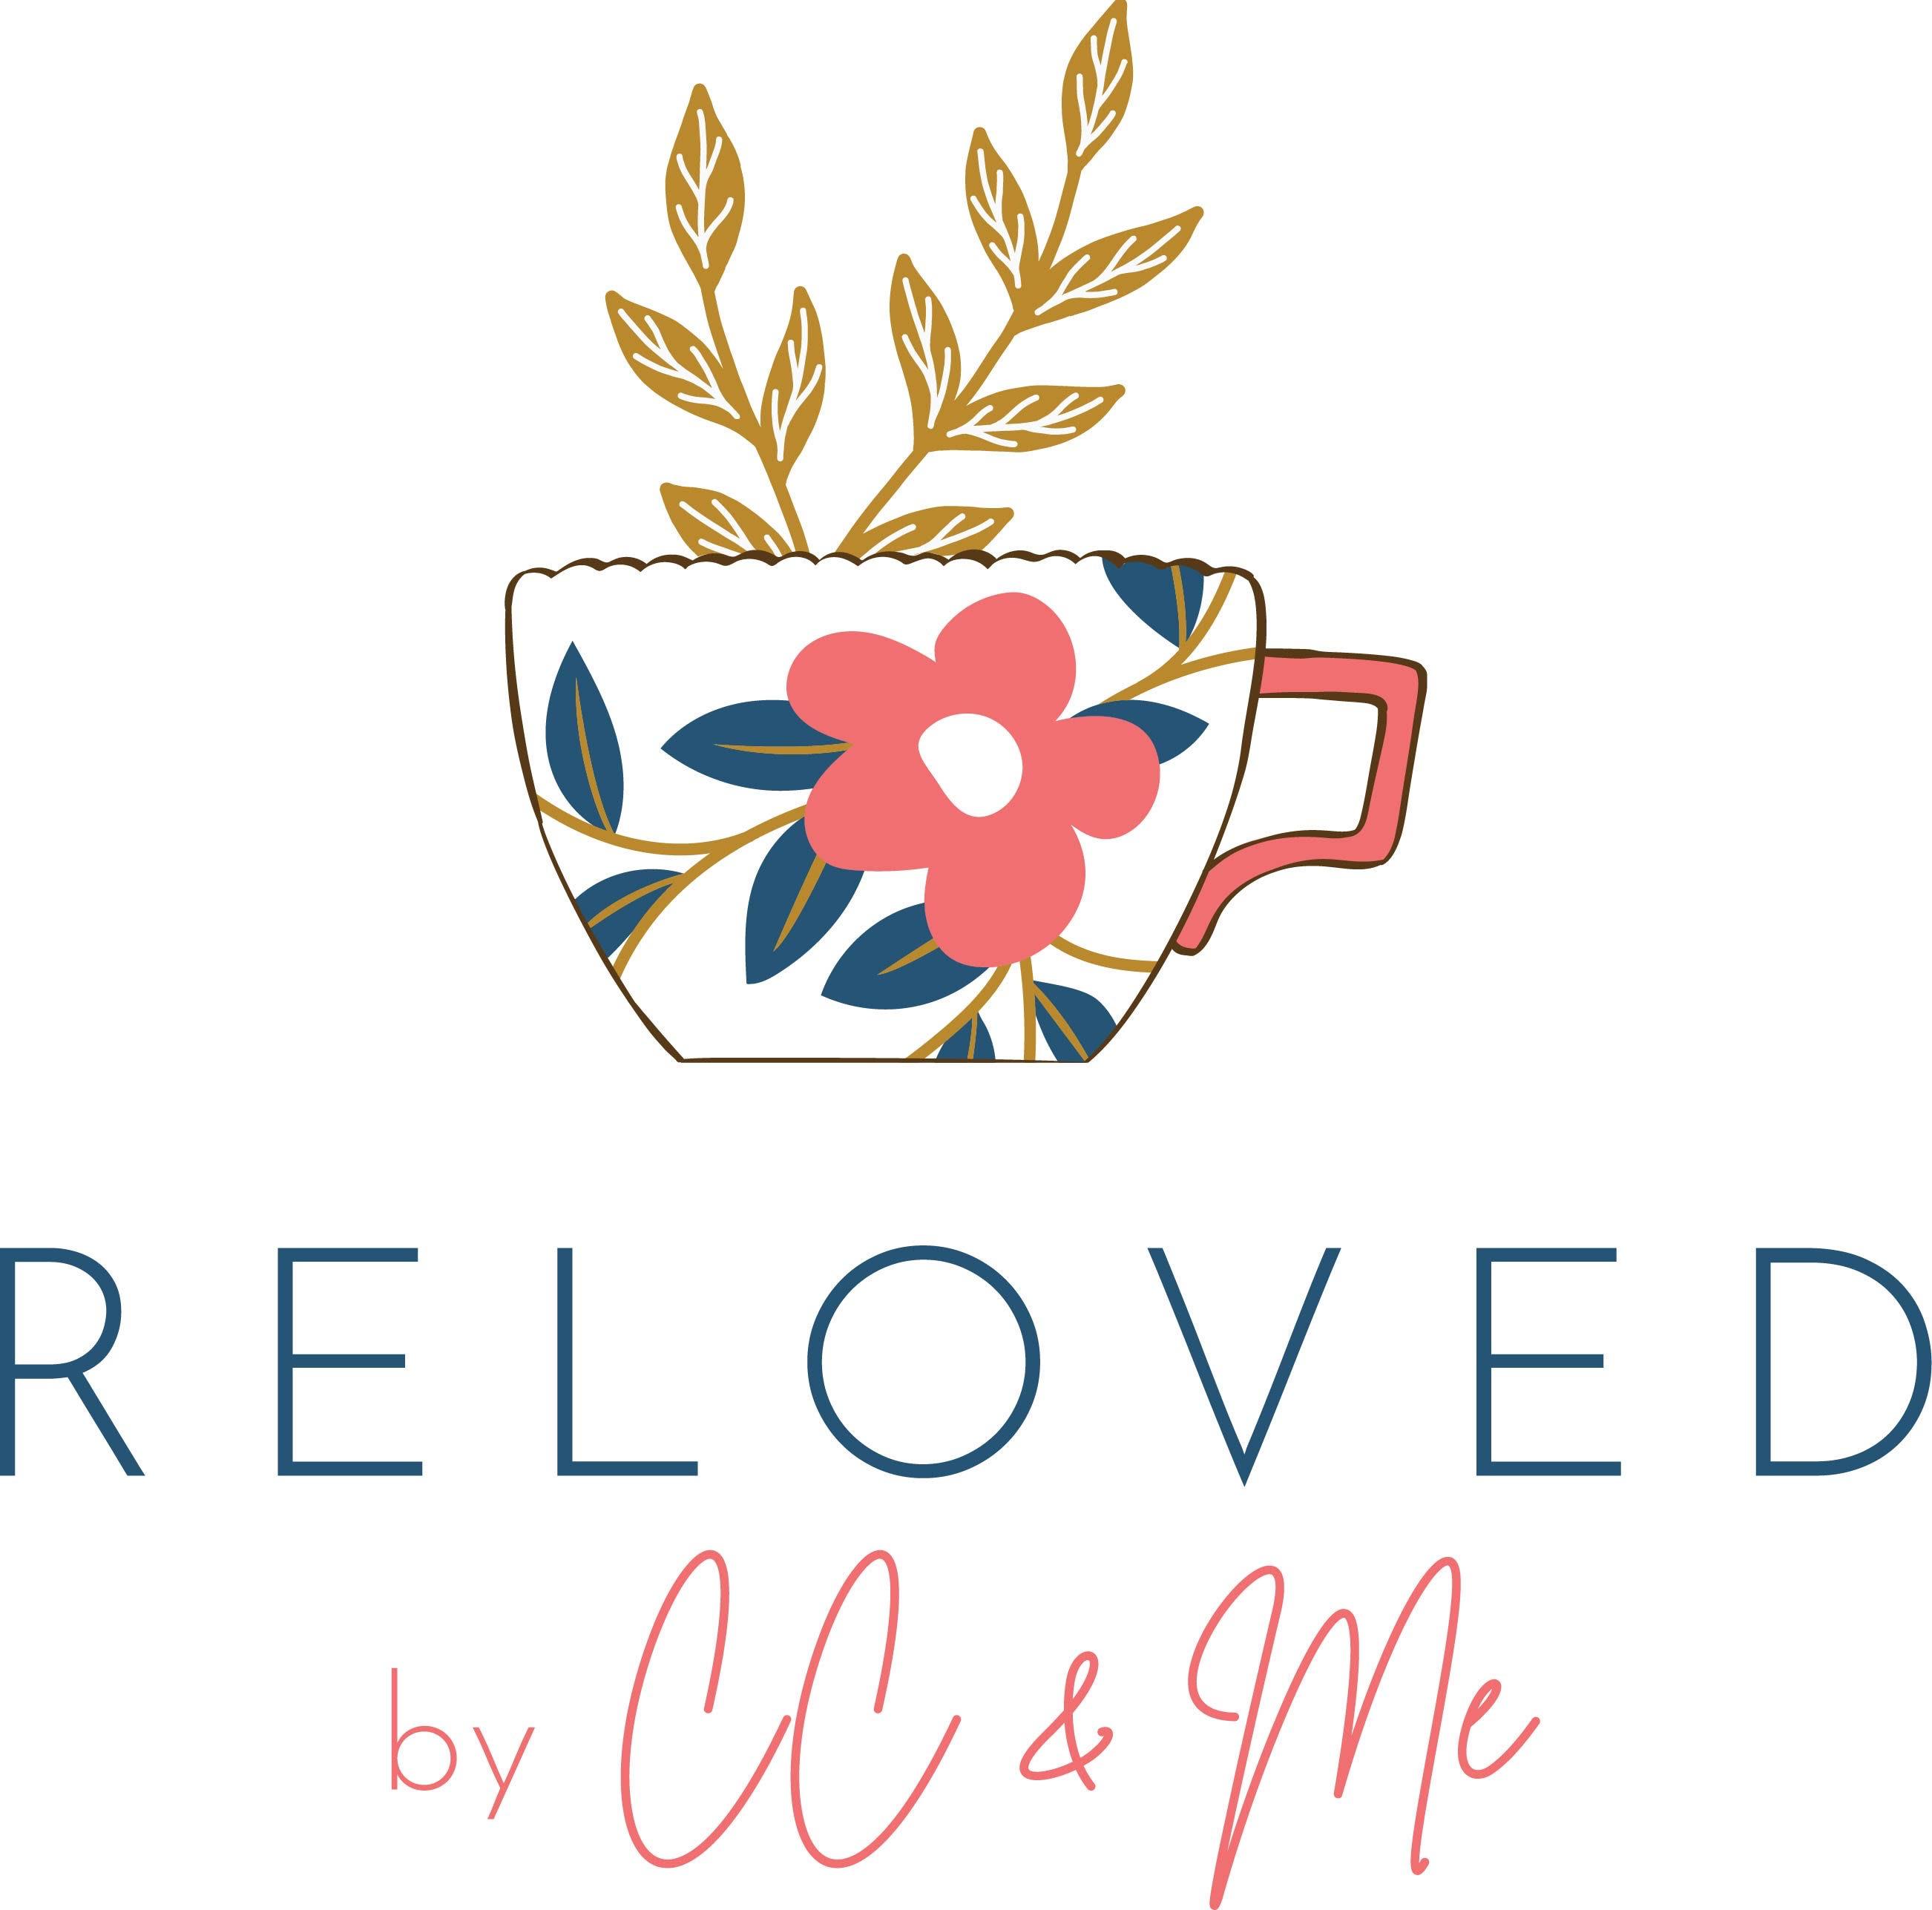 Reloved By CC & Me